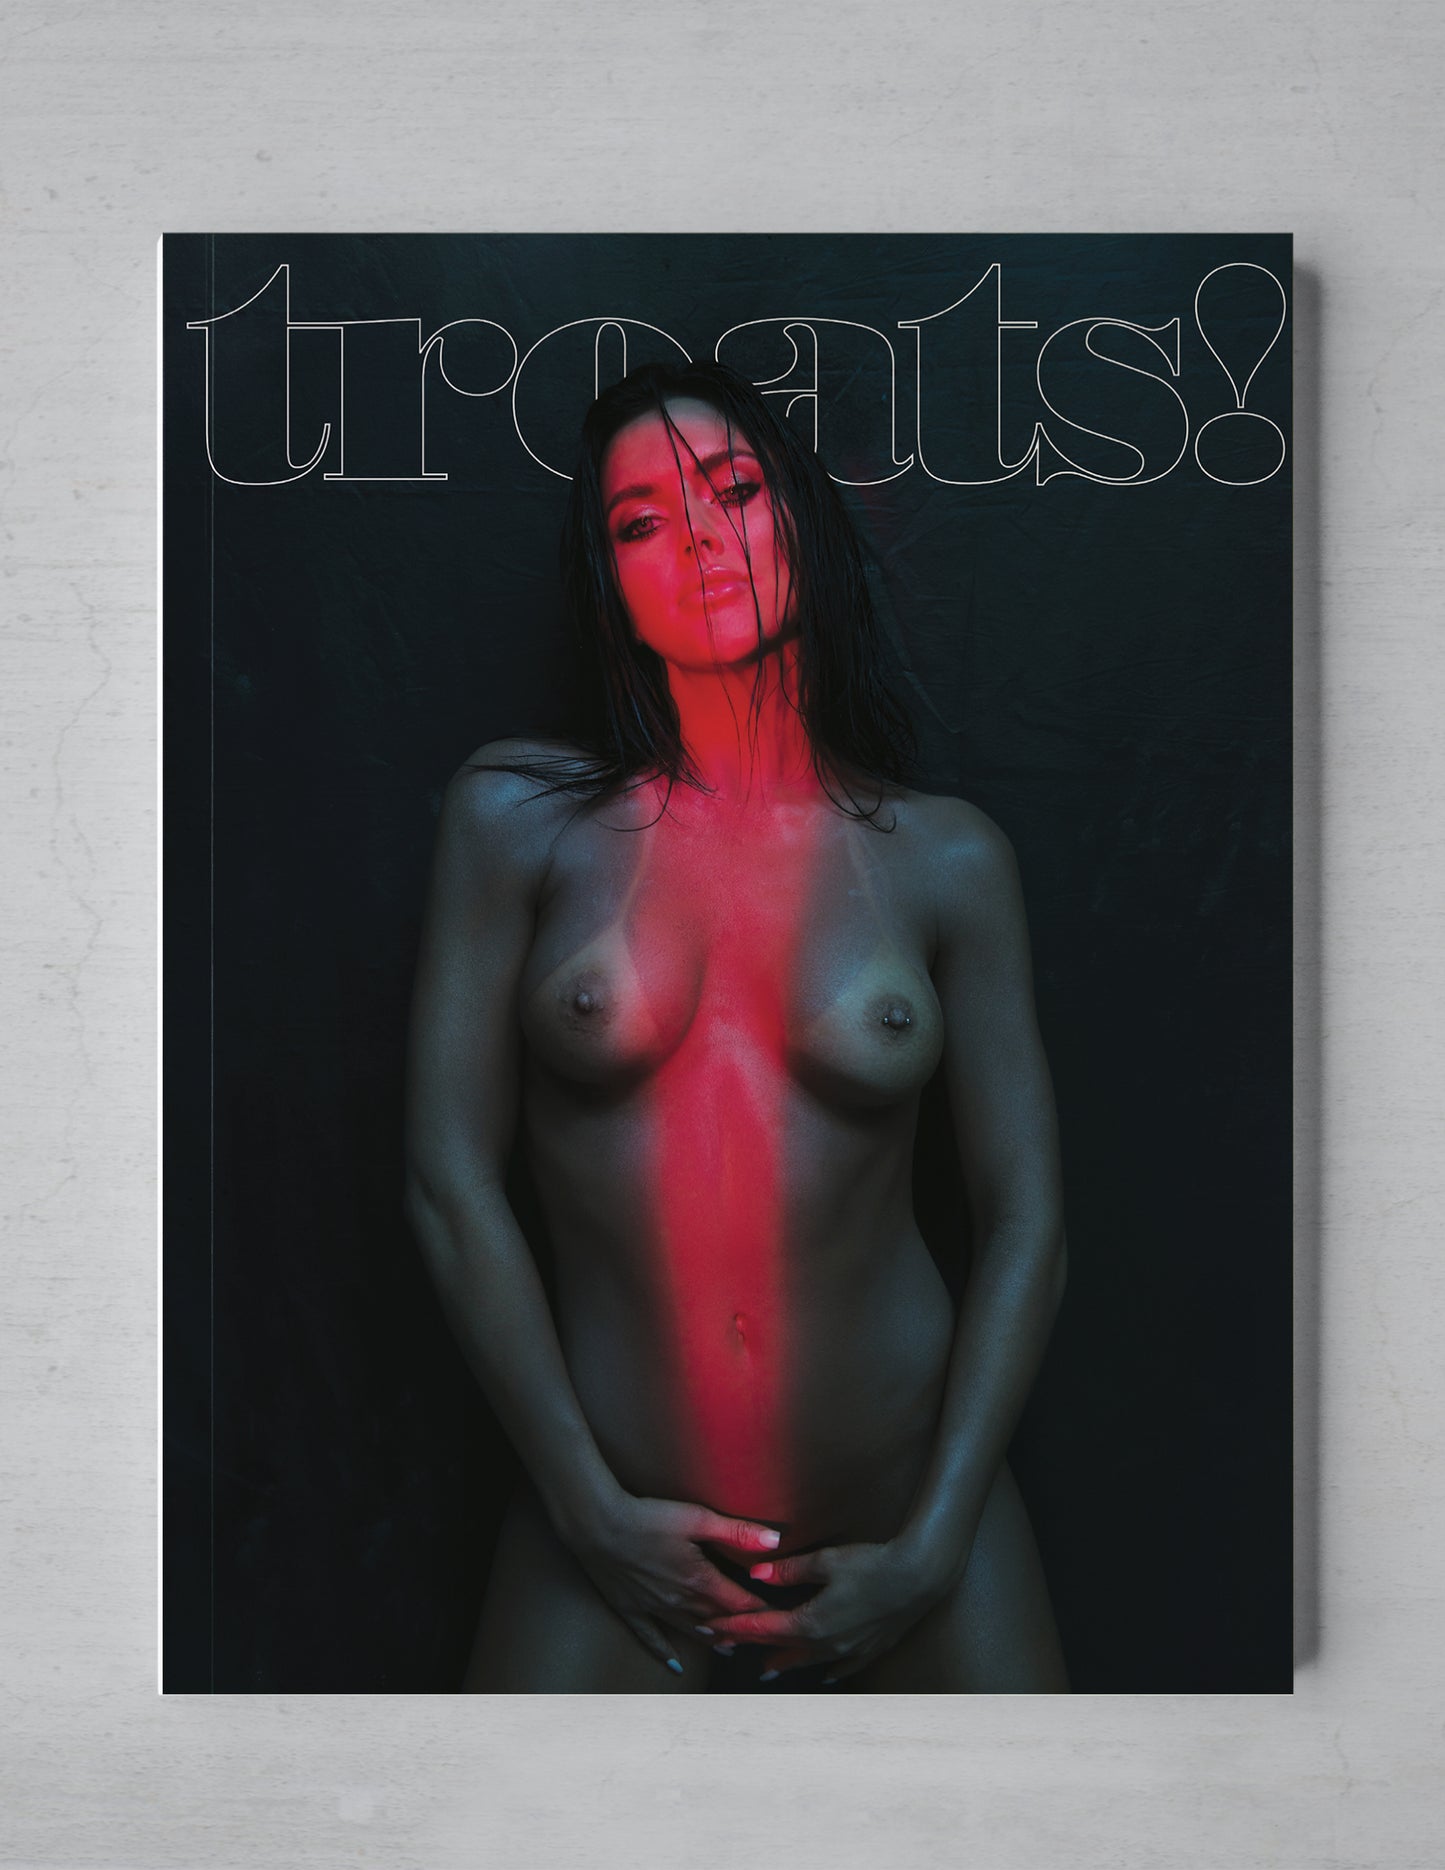 TREATS! ISSUE 13 - KELSIE SMEBY